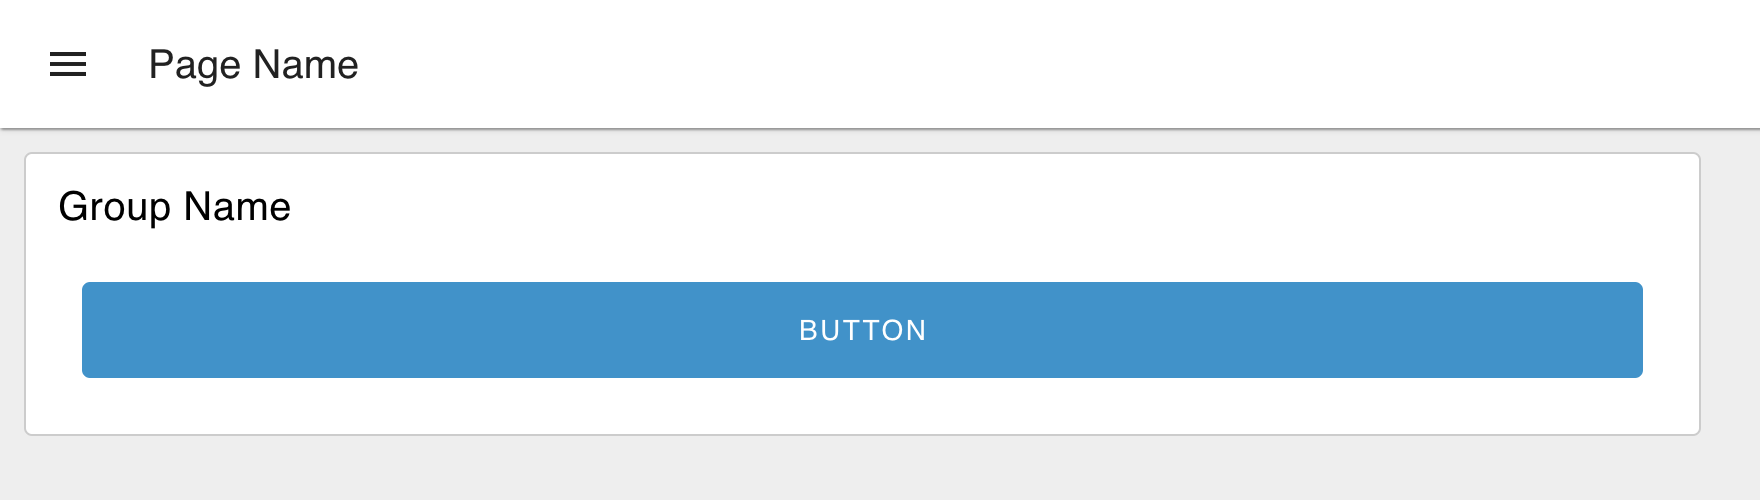 Example of a Button